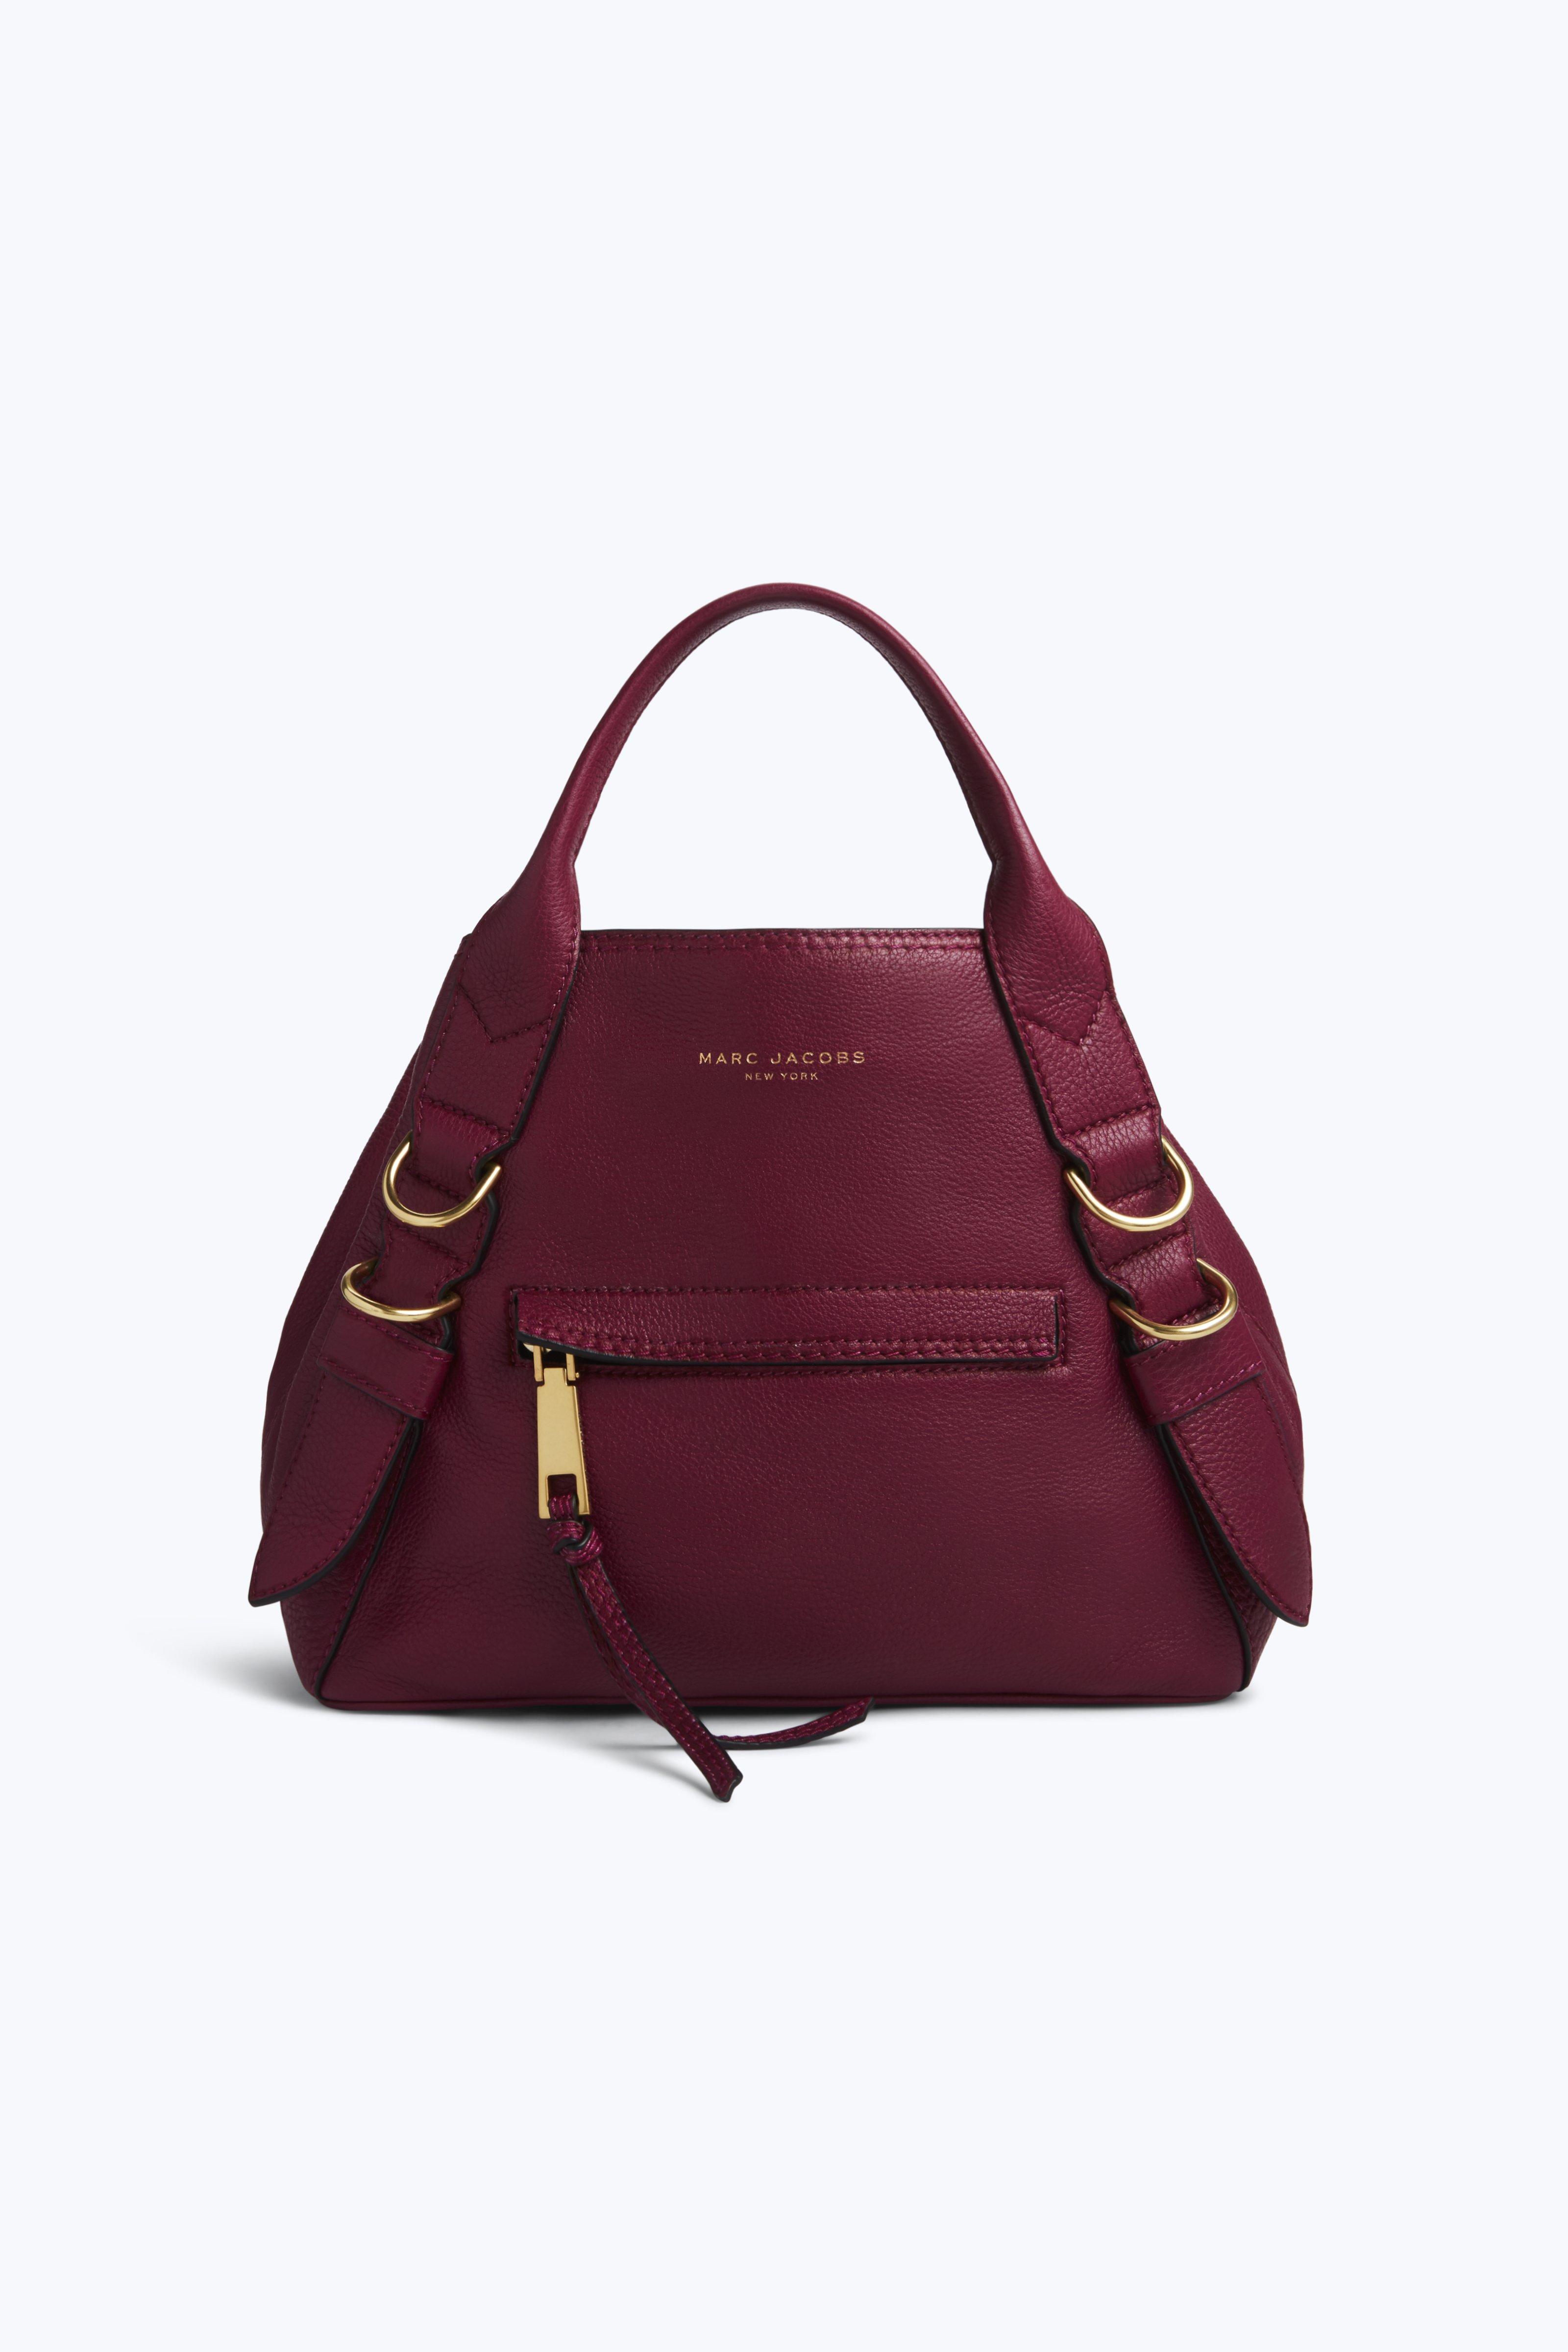 MARC JACOBS SMALL ANCHOR LEATHER SHOULDER BAG, BERRY | ModeSens